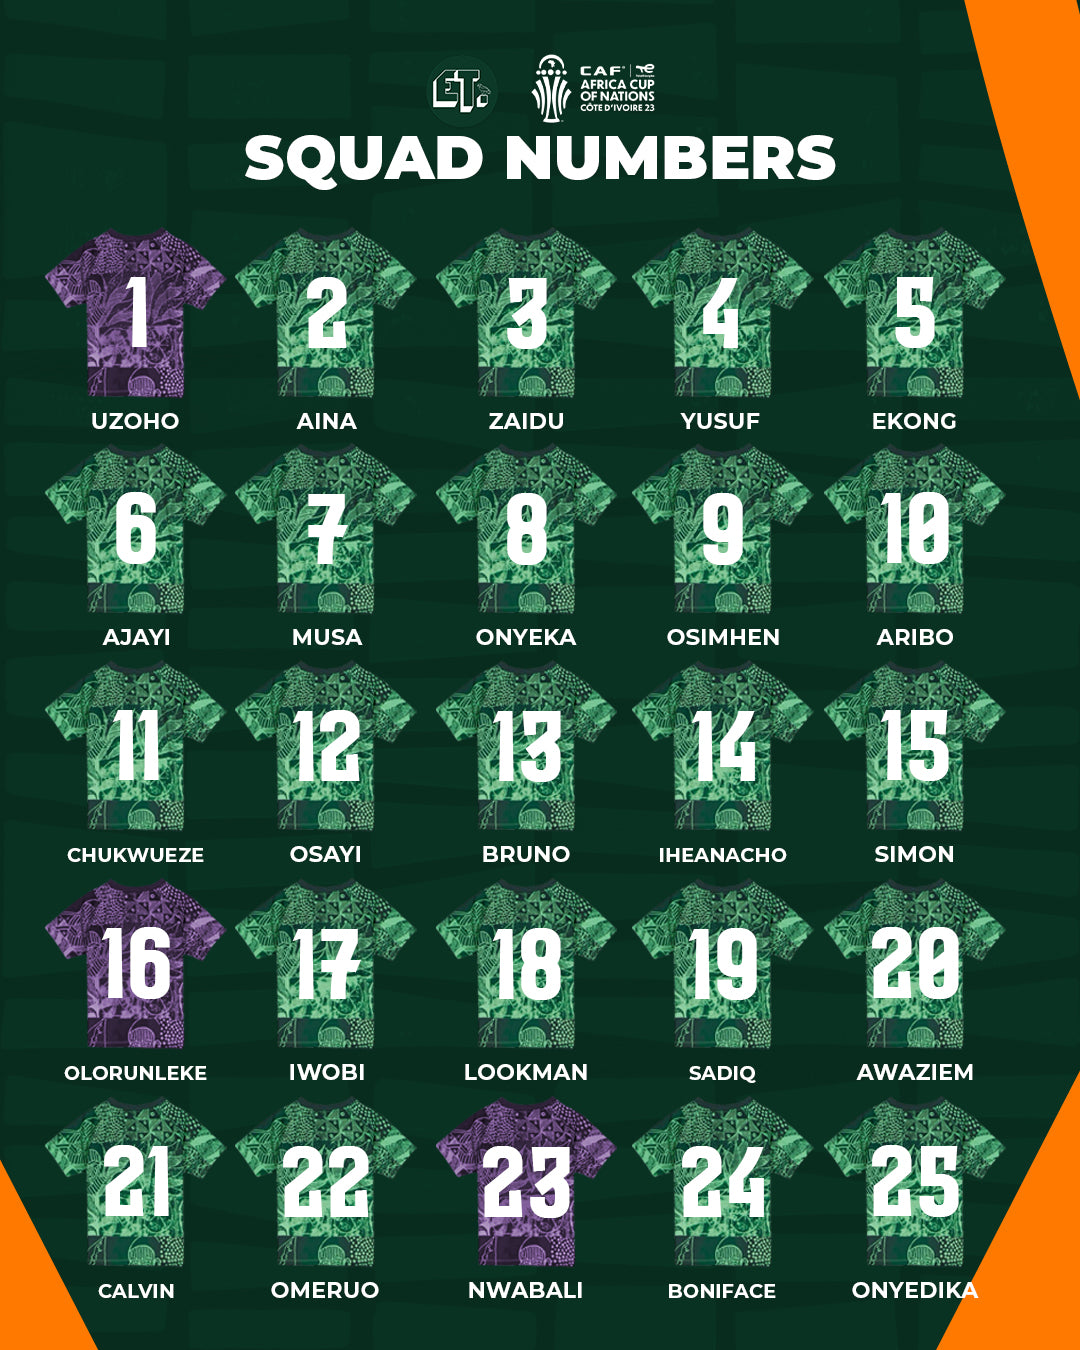 Official: Super Eagles pick squad numbers for AFCON 2023